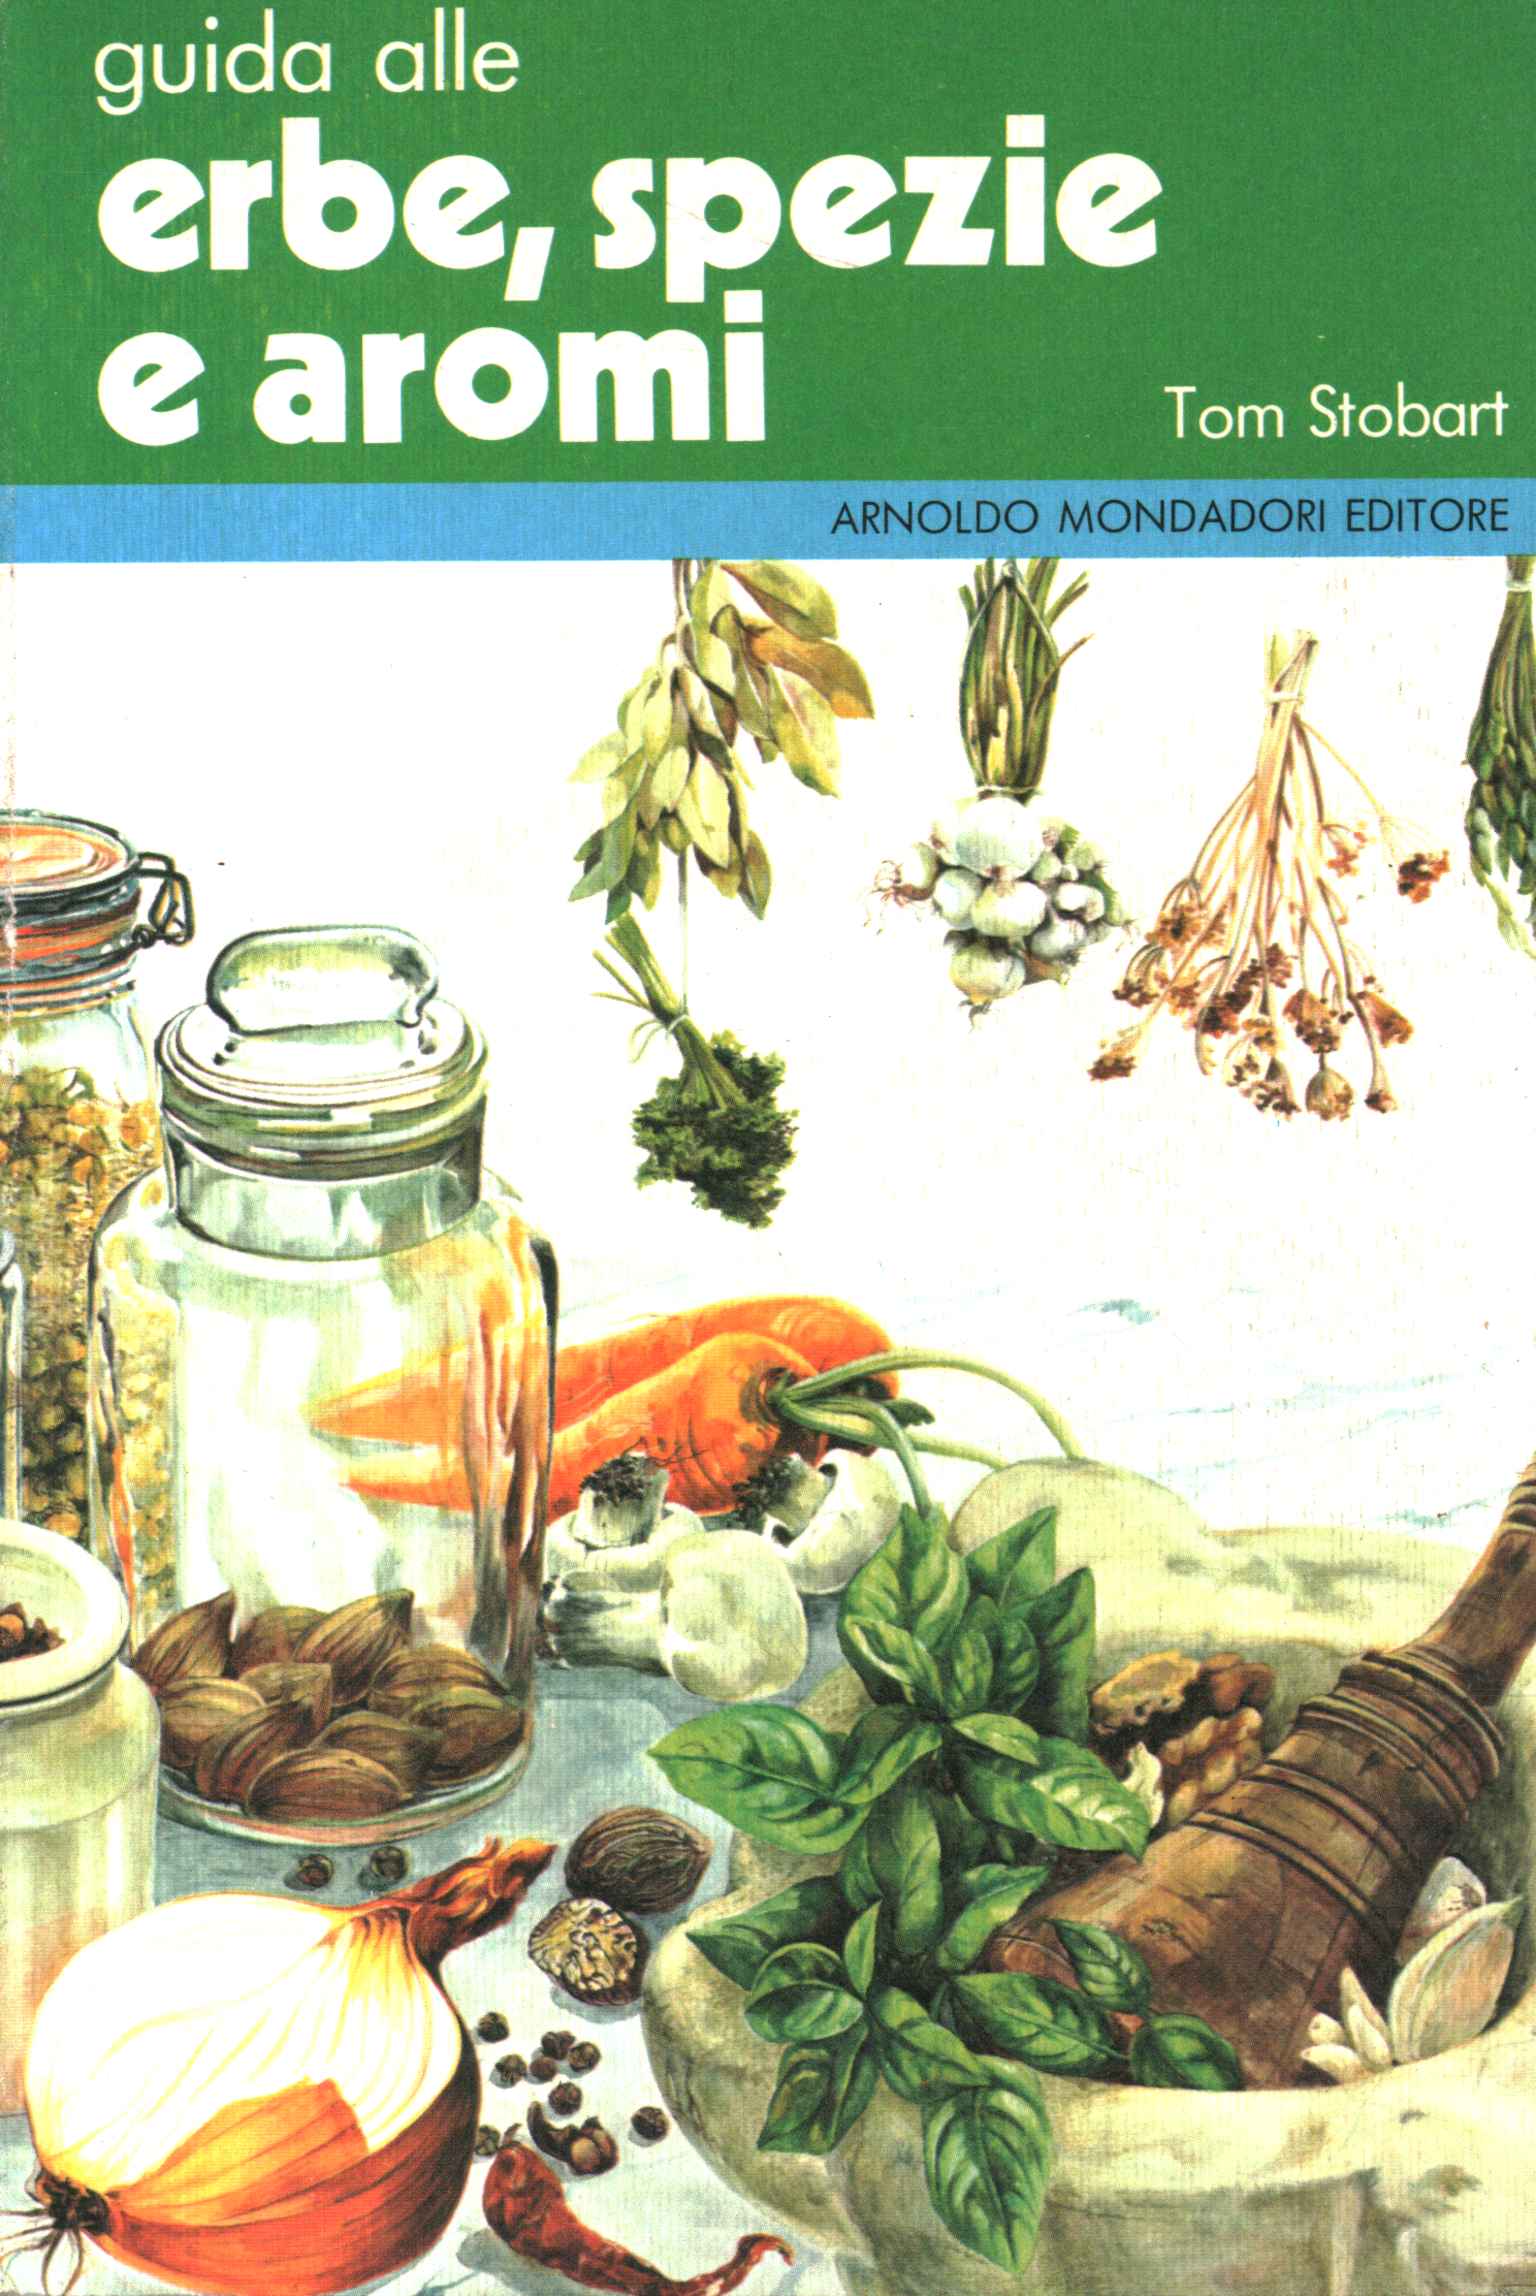 Guide to herbs, spices and aromas, Guide to herbs, spices and aromas